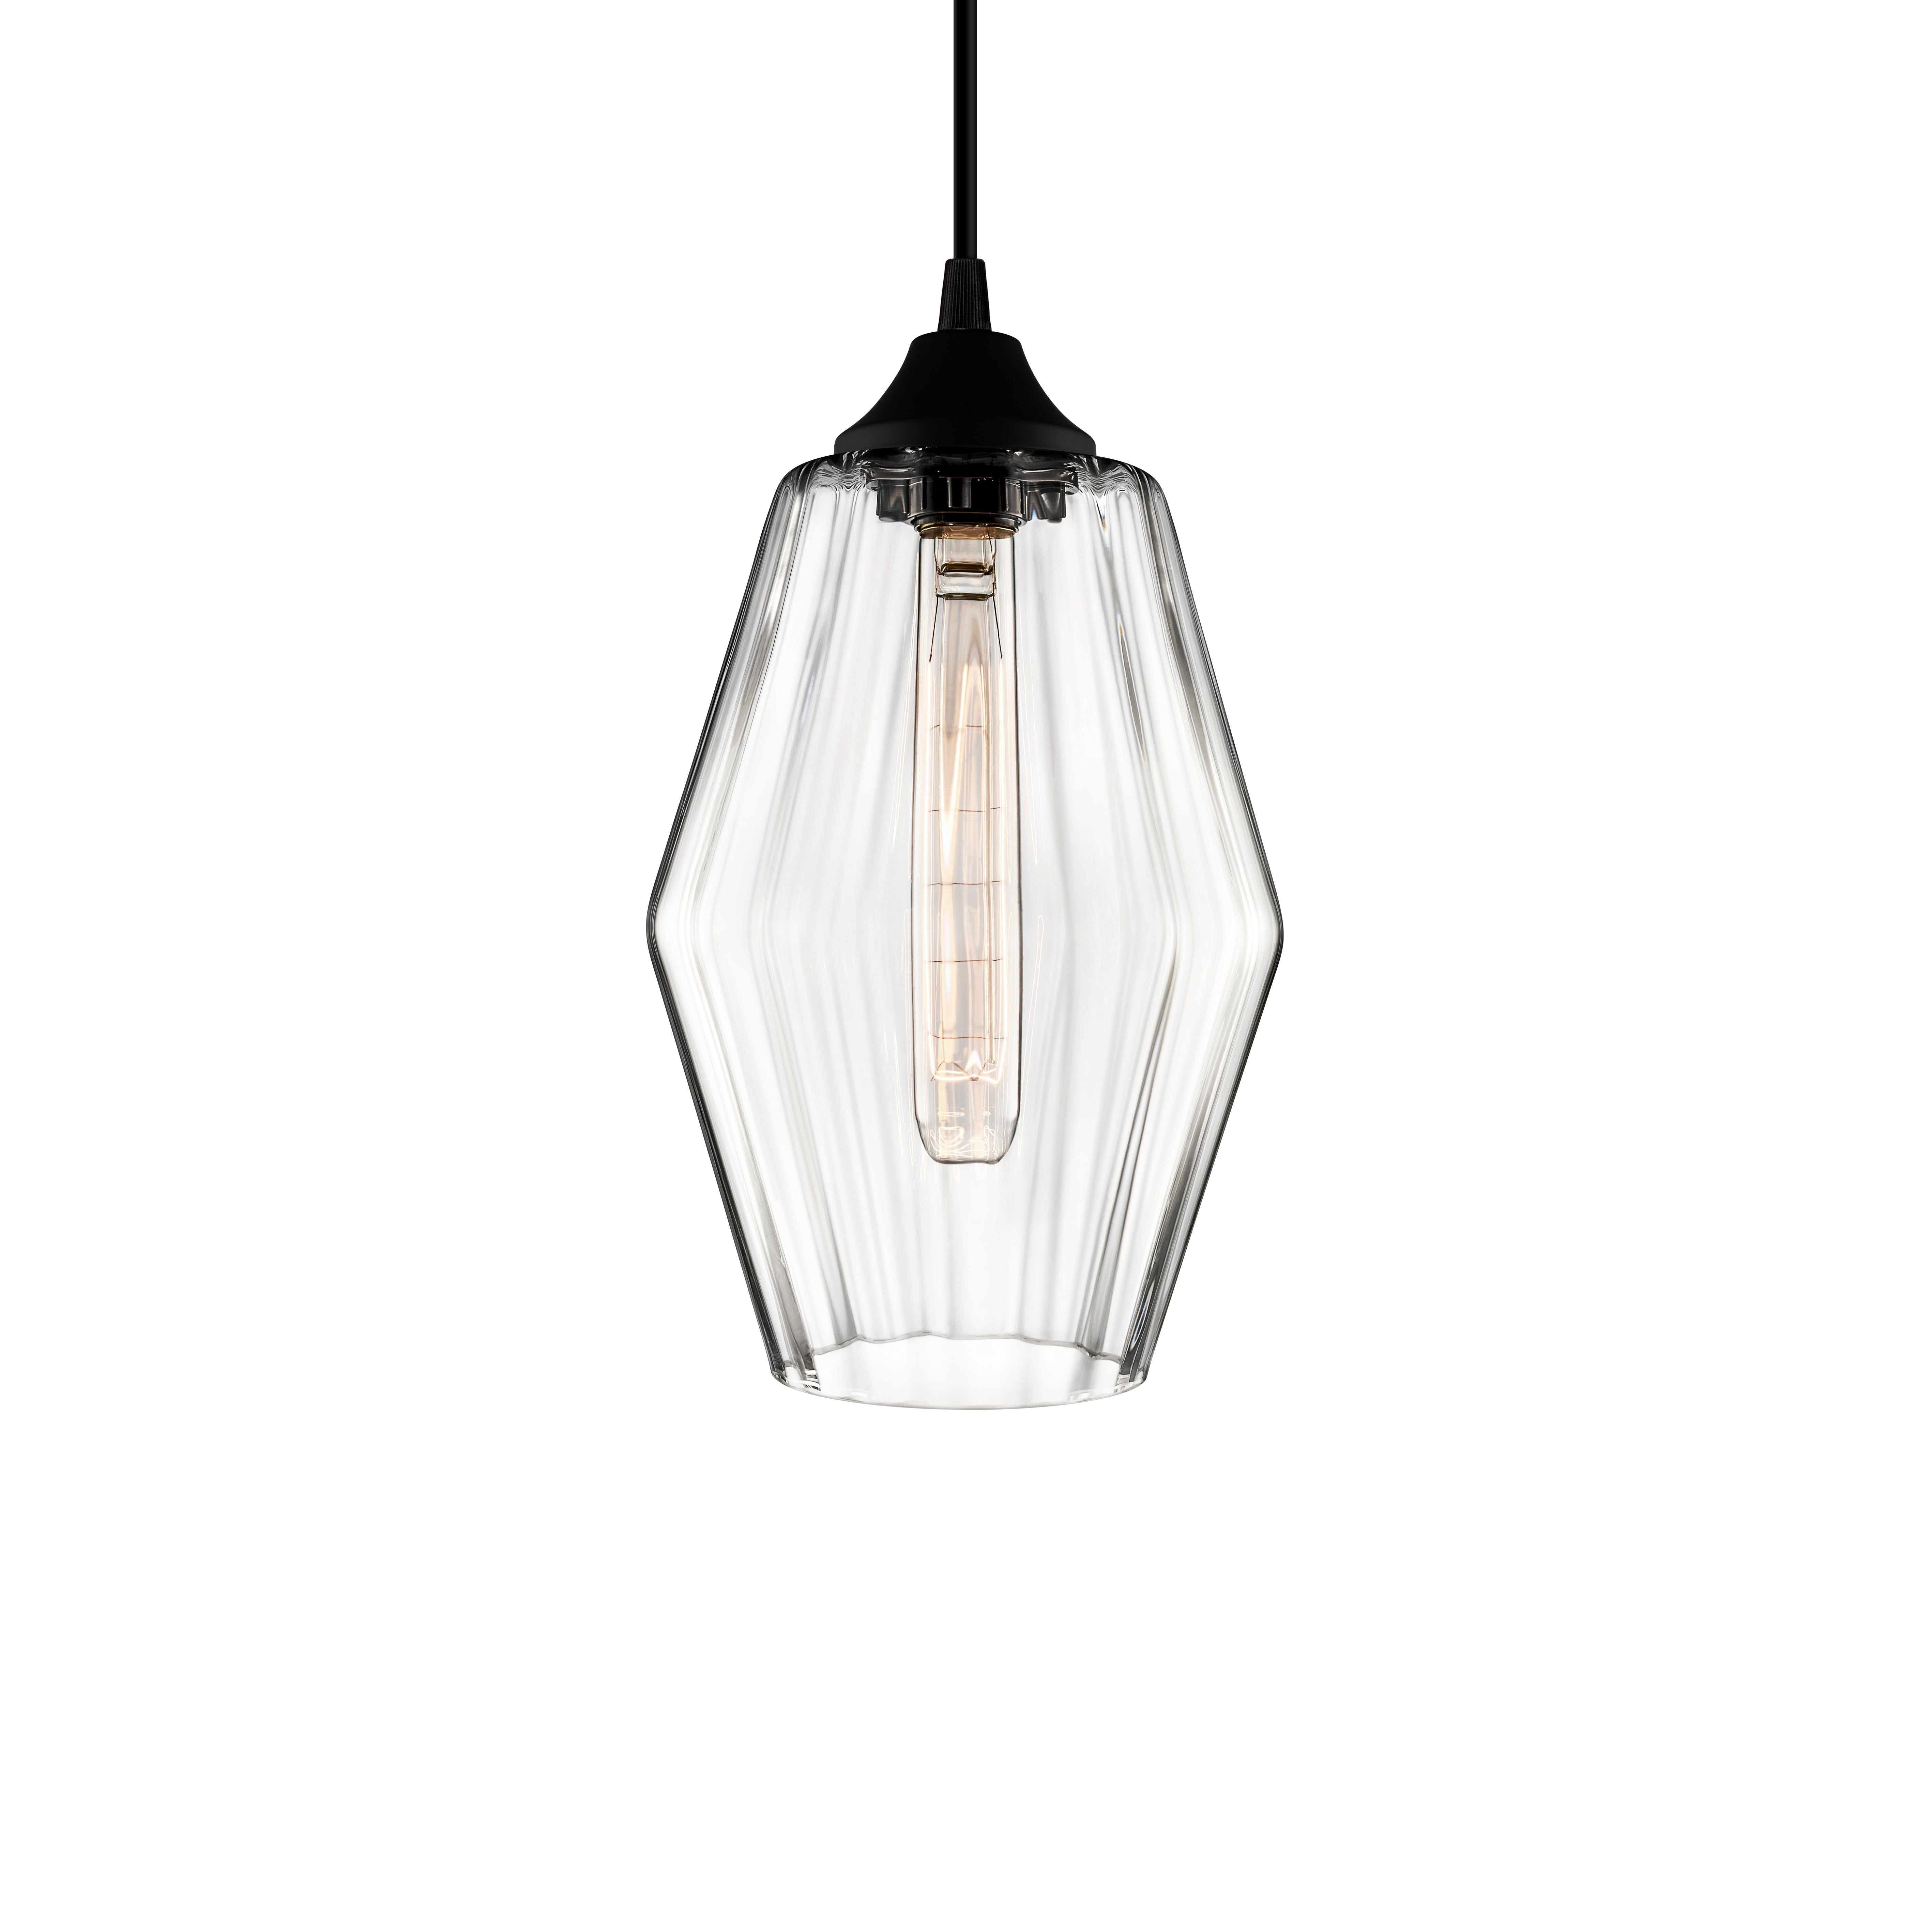 American Marquise Petite Gray Optique Handblown Modern Glass Pendant Light, Made in USA For Sale